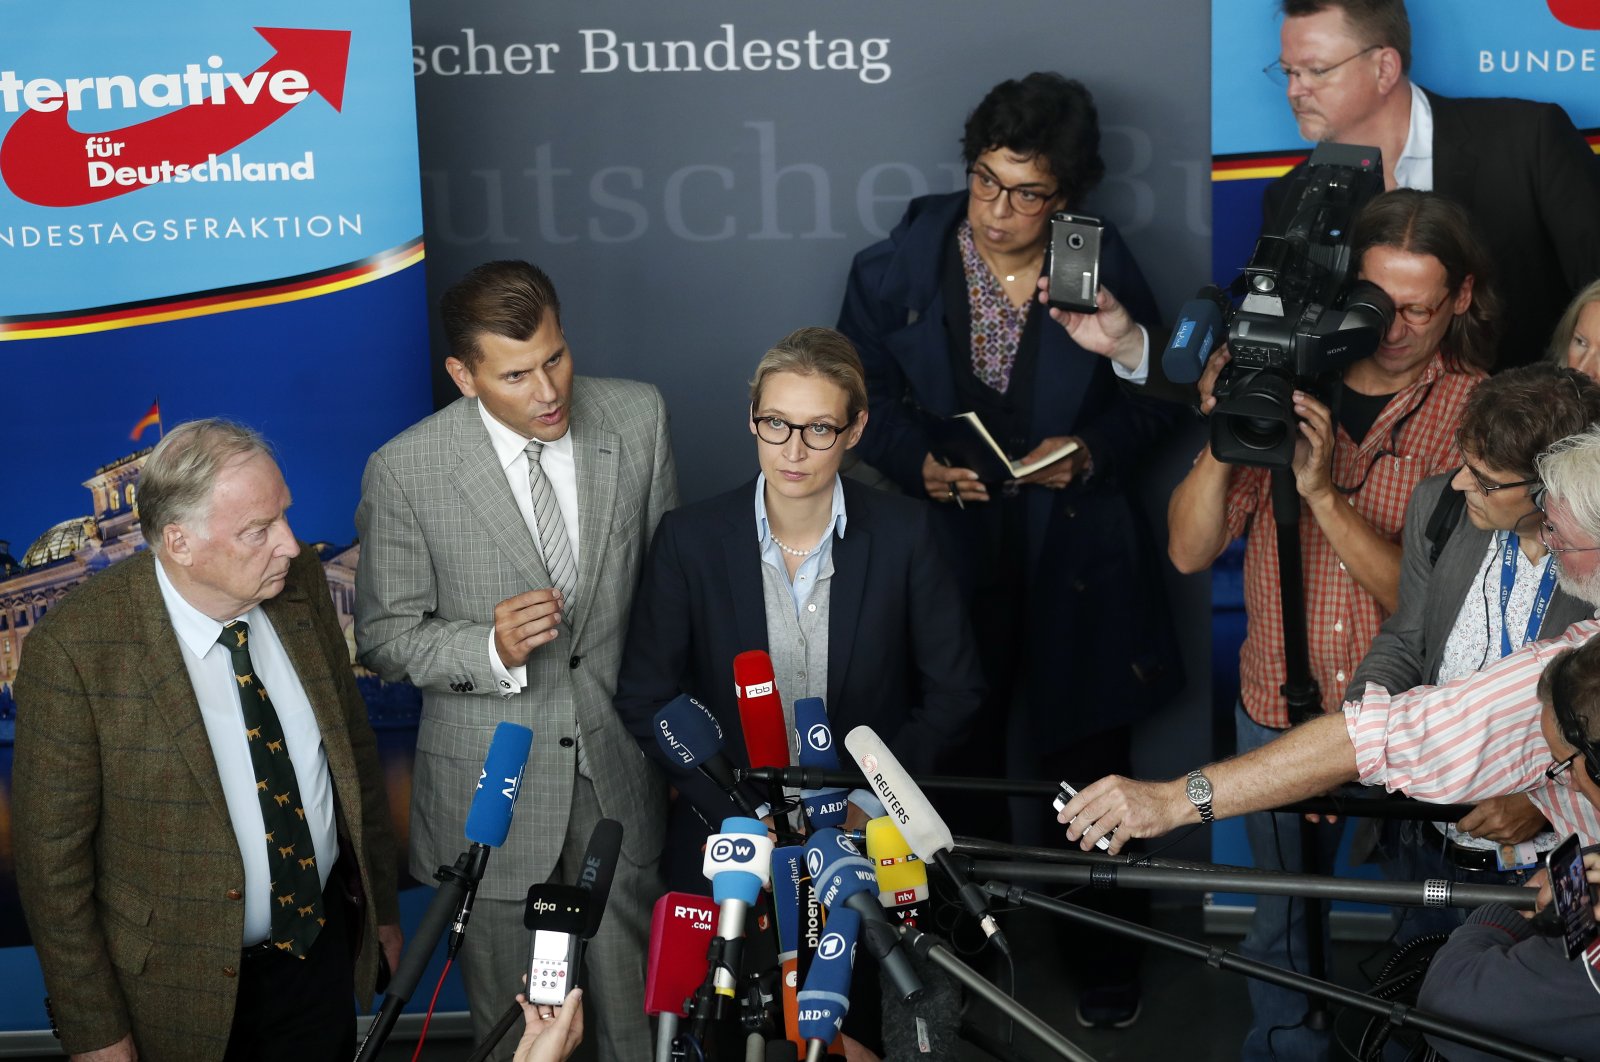 Christian Lueth (2nd from L), spokesman of the German right-wing populist party Alternative for Germany (AfD), and the co-top candidates for the general elections Alice Weidel (C) and Alexander Gauland (L) address the media prior to the first parliamentary group meeting of the party, in Berlin, Germany, Sept. 26, 2017. (EPA Photo)